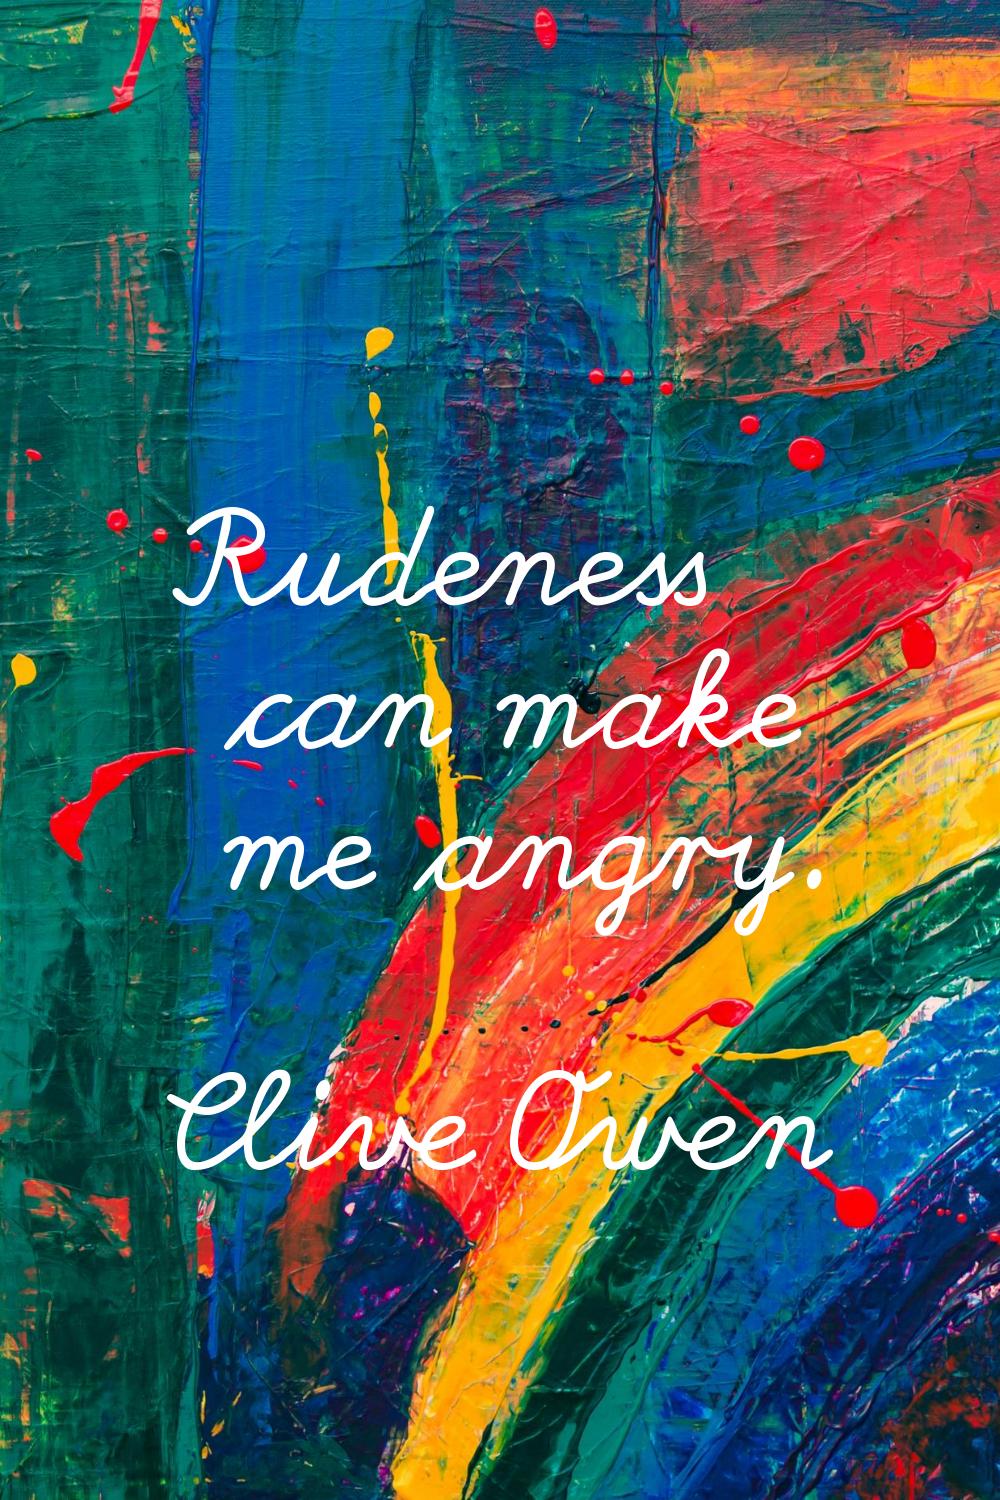 Rudeness can make me angry.